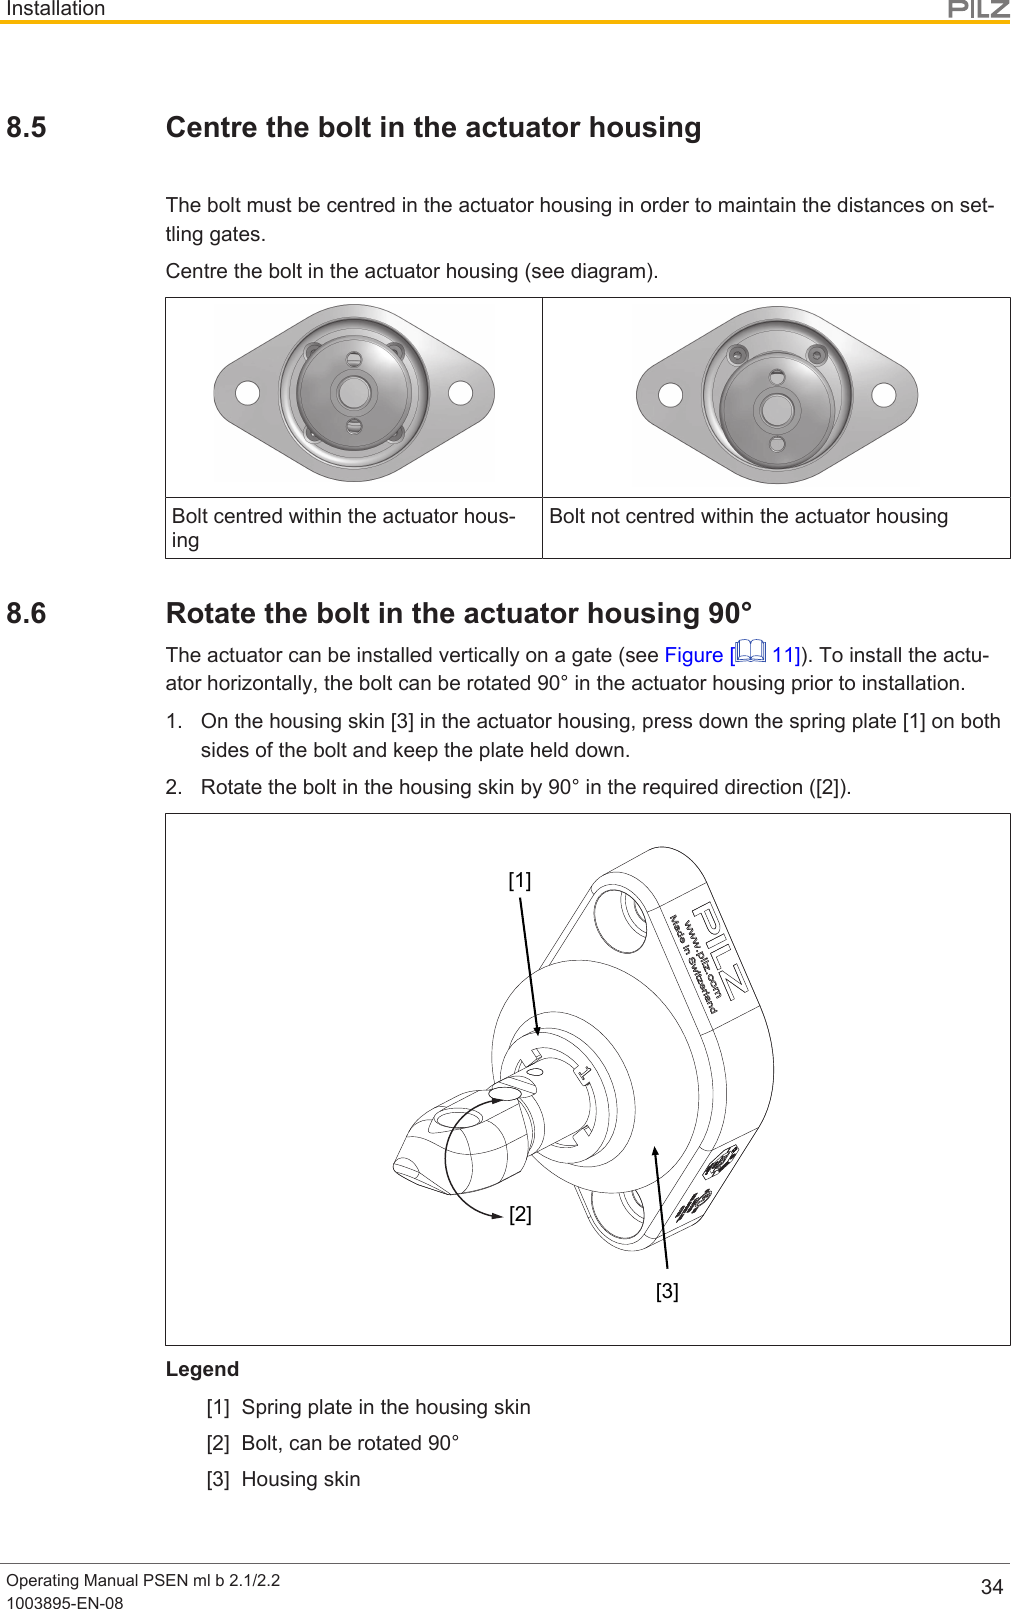 InstallationOperating Manual PSEN ml b 2.1/2.21003895-EN-08 348.5 Centre the bolt in the actuator housingThe bolt must be centred in the actuator housing in order to maintain the distances on set-tling gates.Centre the bolt in the actuator housing (see diagram).Bolt centred within the actuator hous-ingBolt not centred within the actuator housing8.6 Rotate the bolt in the actuator housing 90°The actuator can be installed vertically on a gate (see Figure [  11]). To install the actu-ator horizontally, the bolt can be rotated 90° in the actuator housing prior to installation.1. On the housing skin [3] in the actuator housing, press down the spring plate [1] on bothsides of the bolt and keep the plate held down.2. Rotate the bolt in the housing skin by 90° in the required direction ([2]).[1][2][3]Legend[1] Spring plate in the housing skin[2] Bolt, can be rotated 90°[3] Housing skin